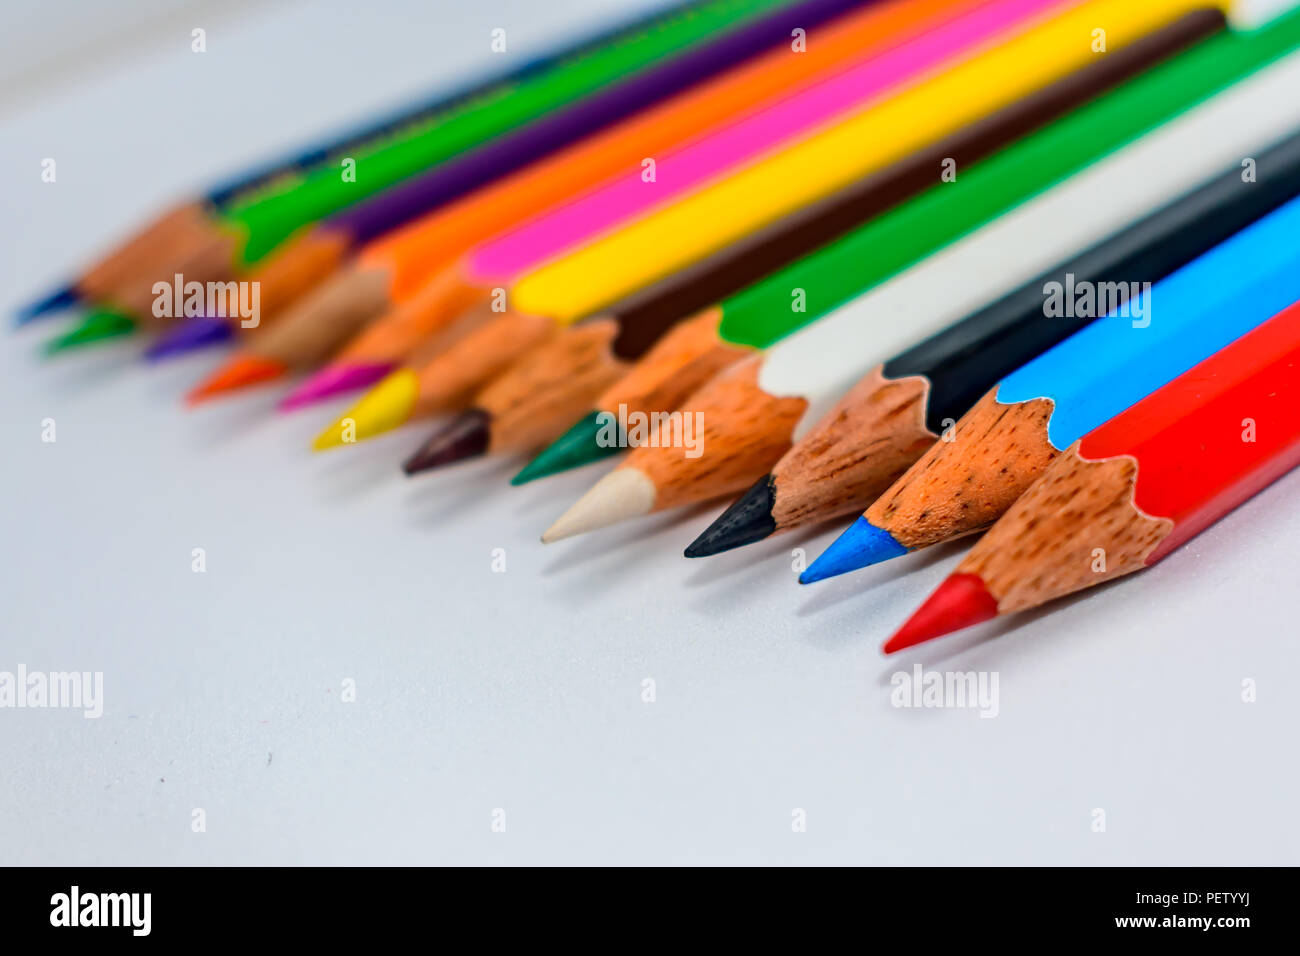 Colored Pencils Writing Utensils Coloring Arranged Stock Photo 2024318933